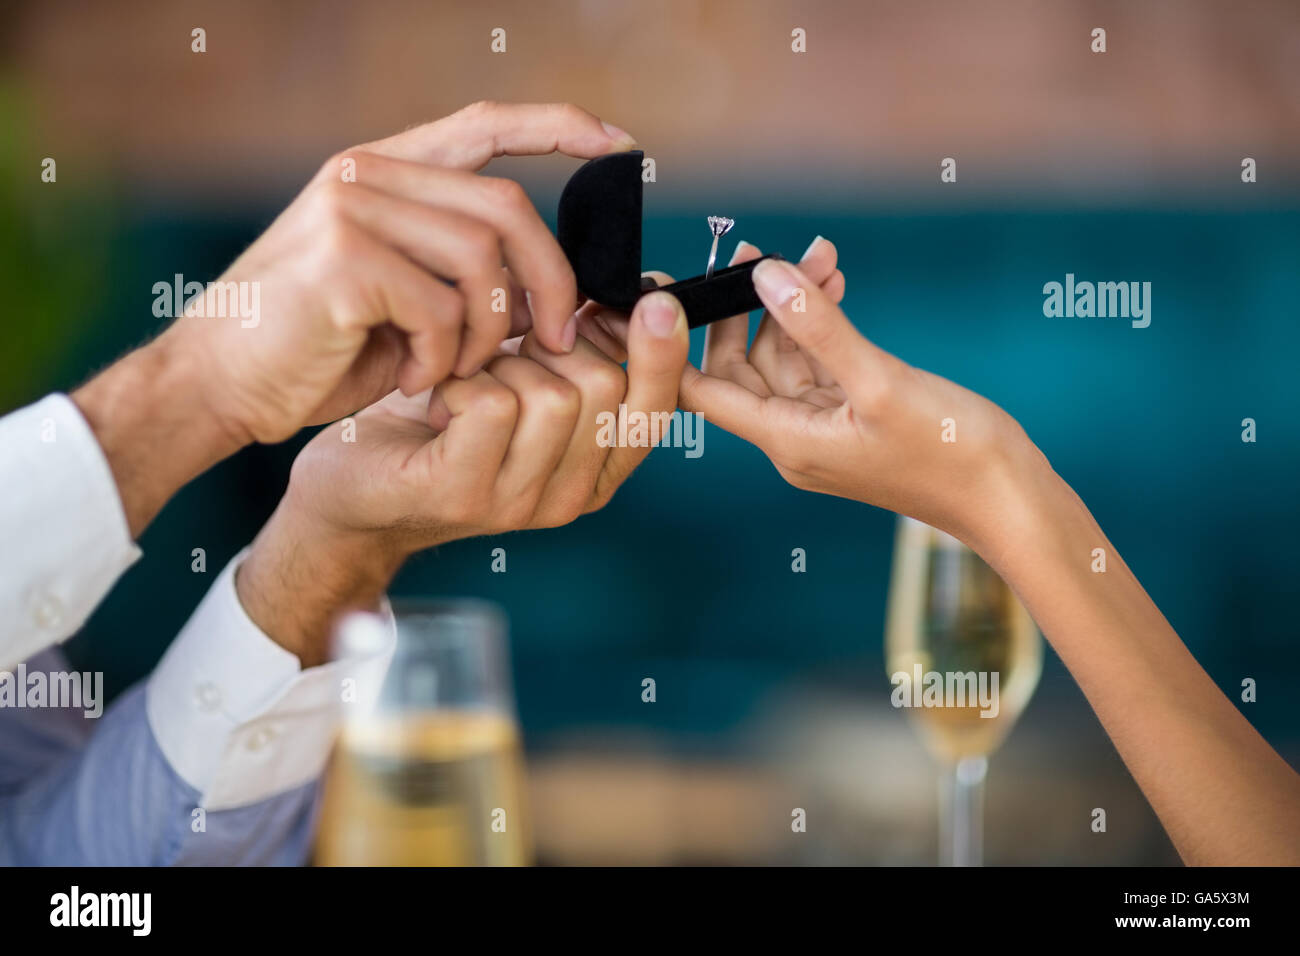 Man proposing to woman offering engagement ring Stock Photo